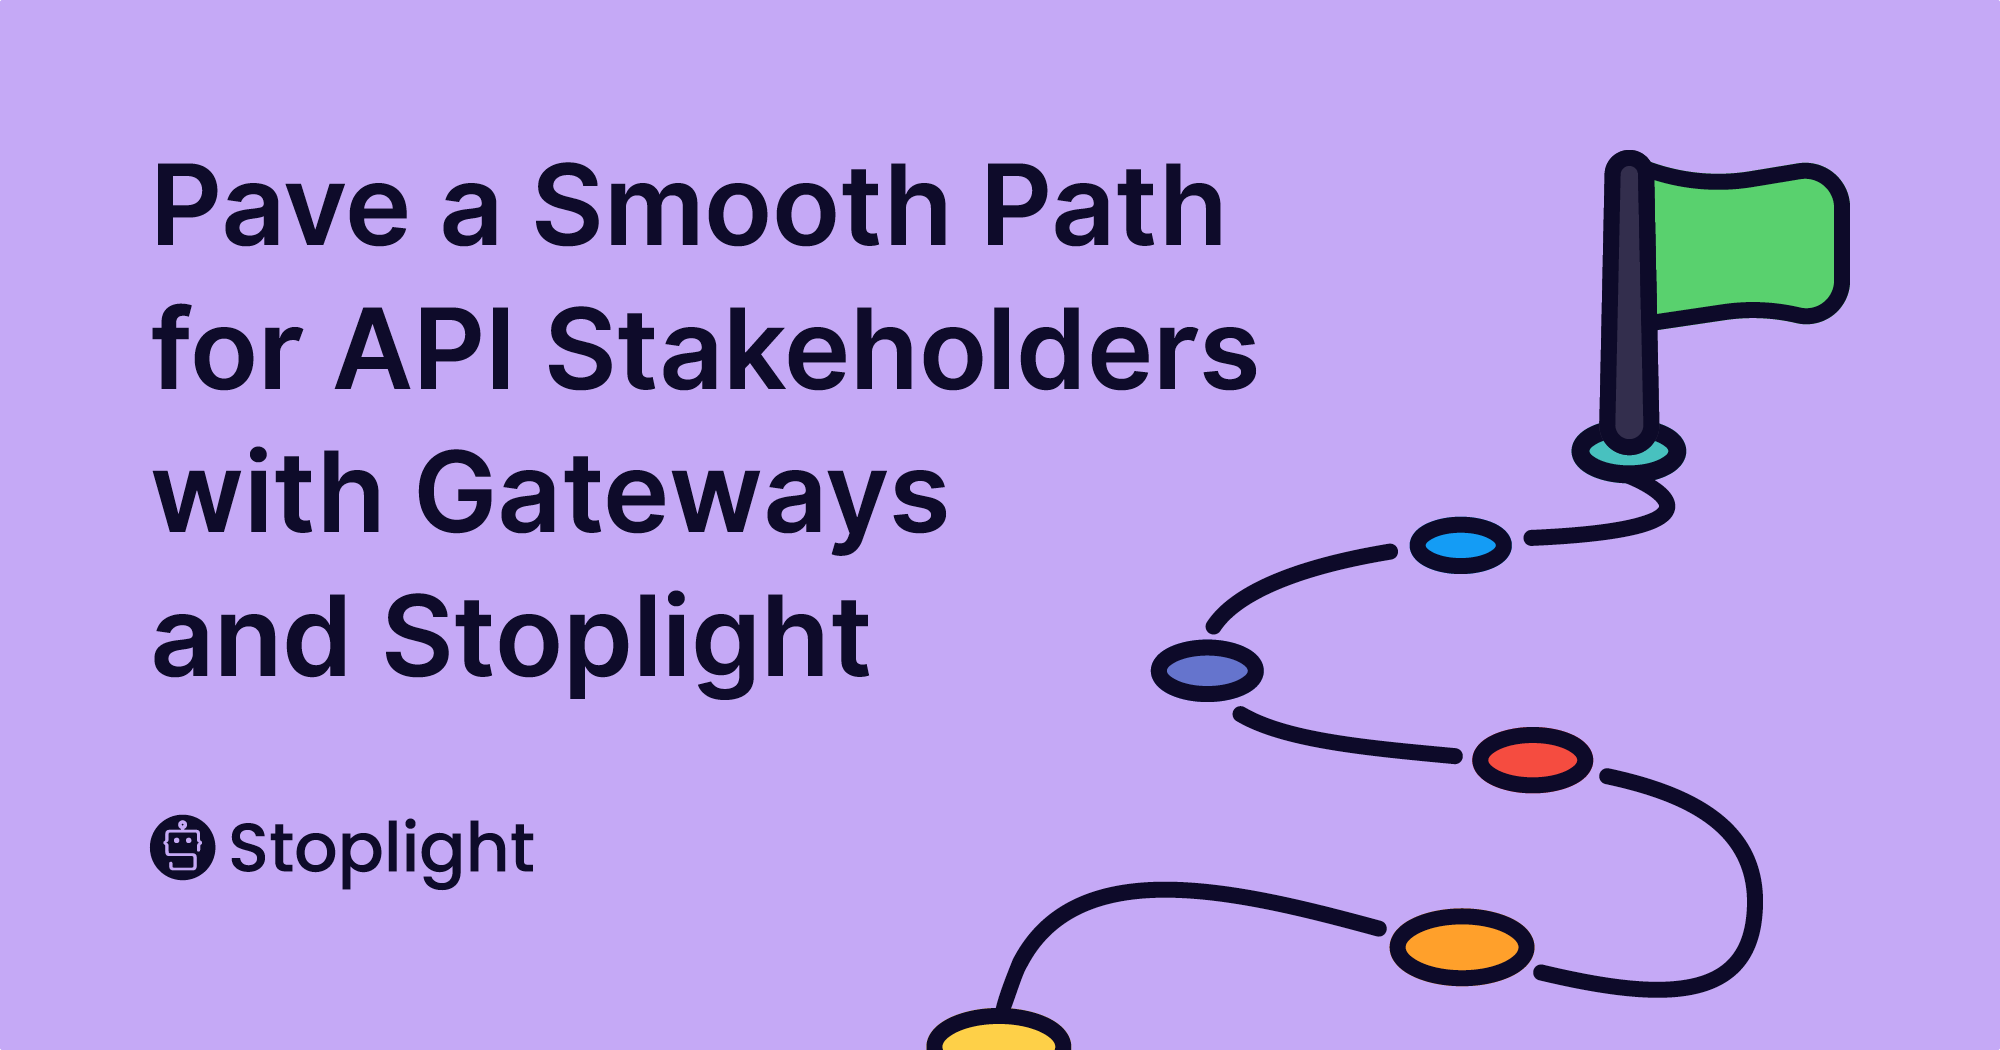 Pave a Smooth Path for API Stakeholders with Gateways and Stoplight